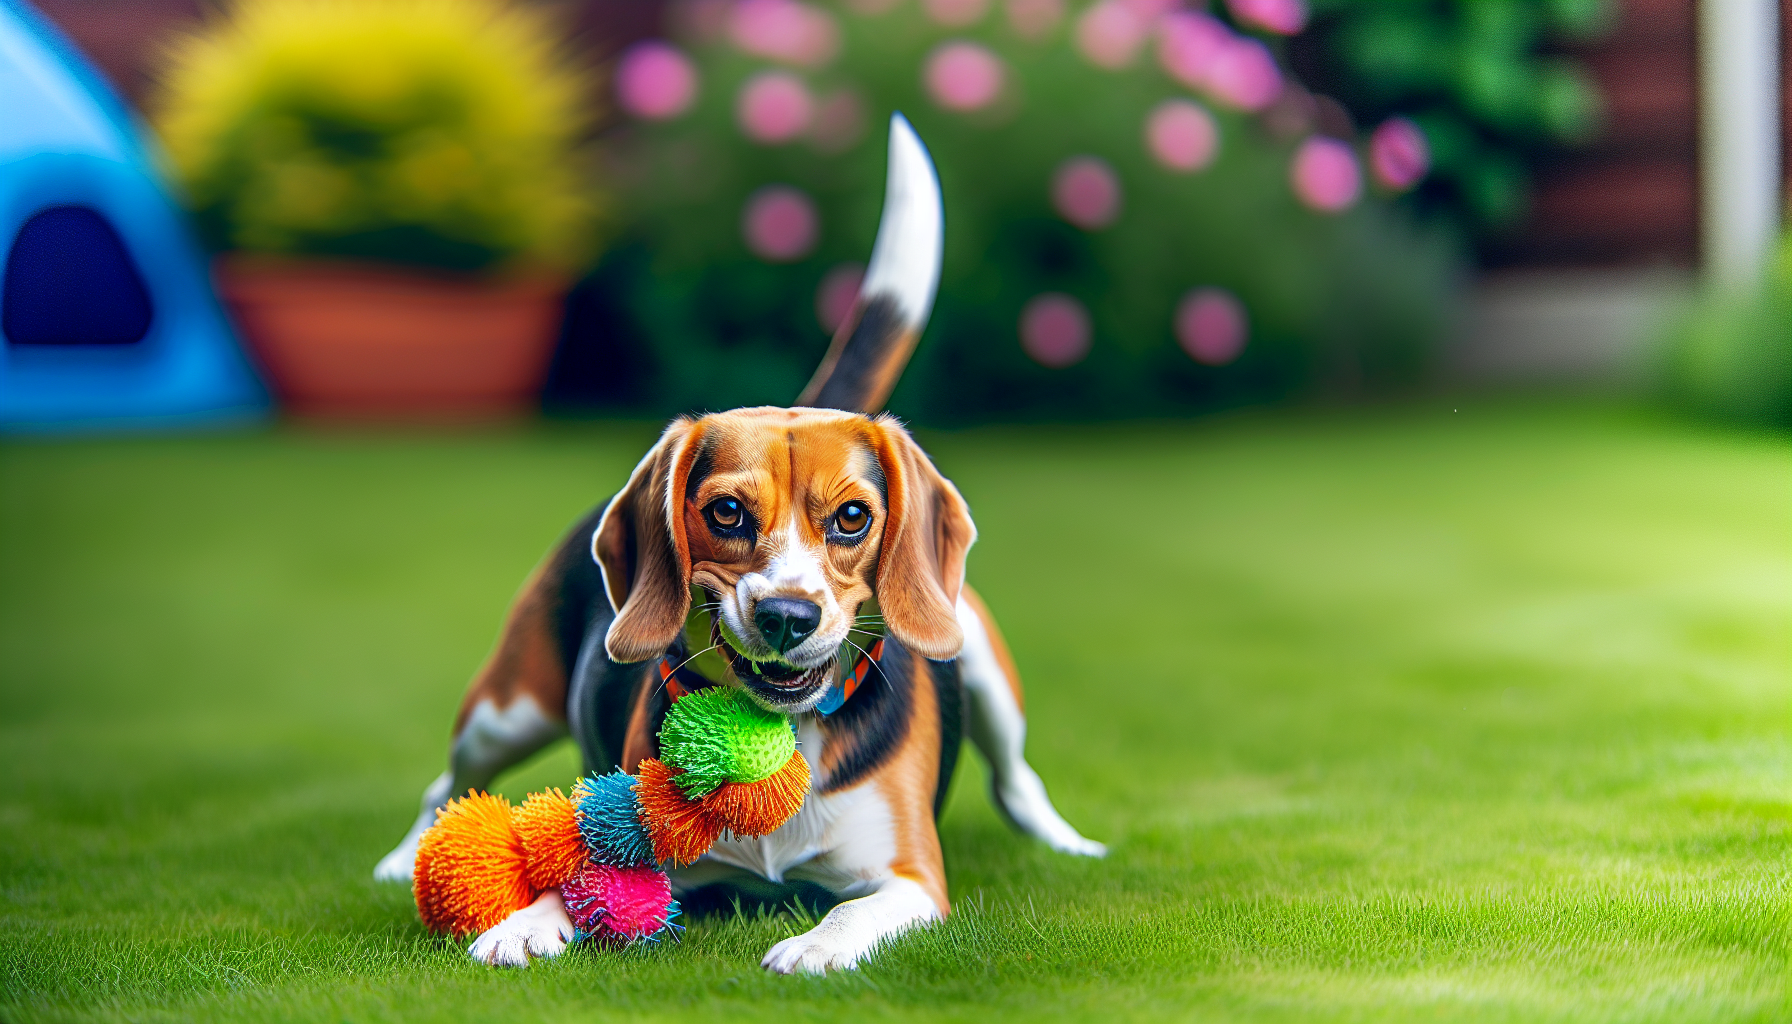 Beagle playing with a toy to prevent boredom